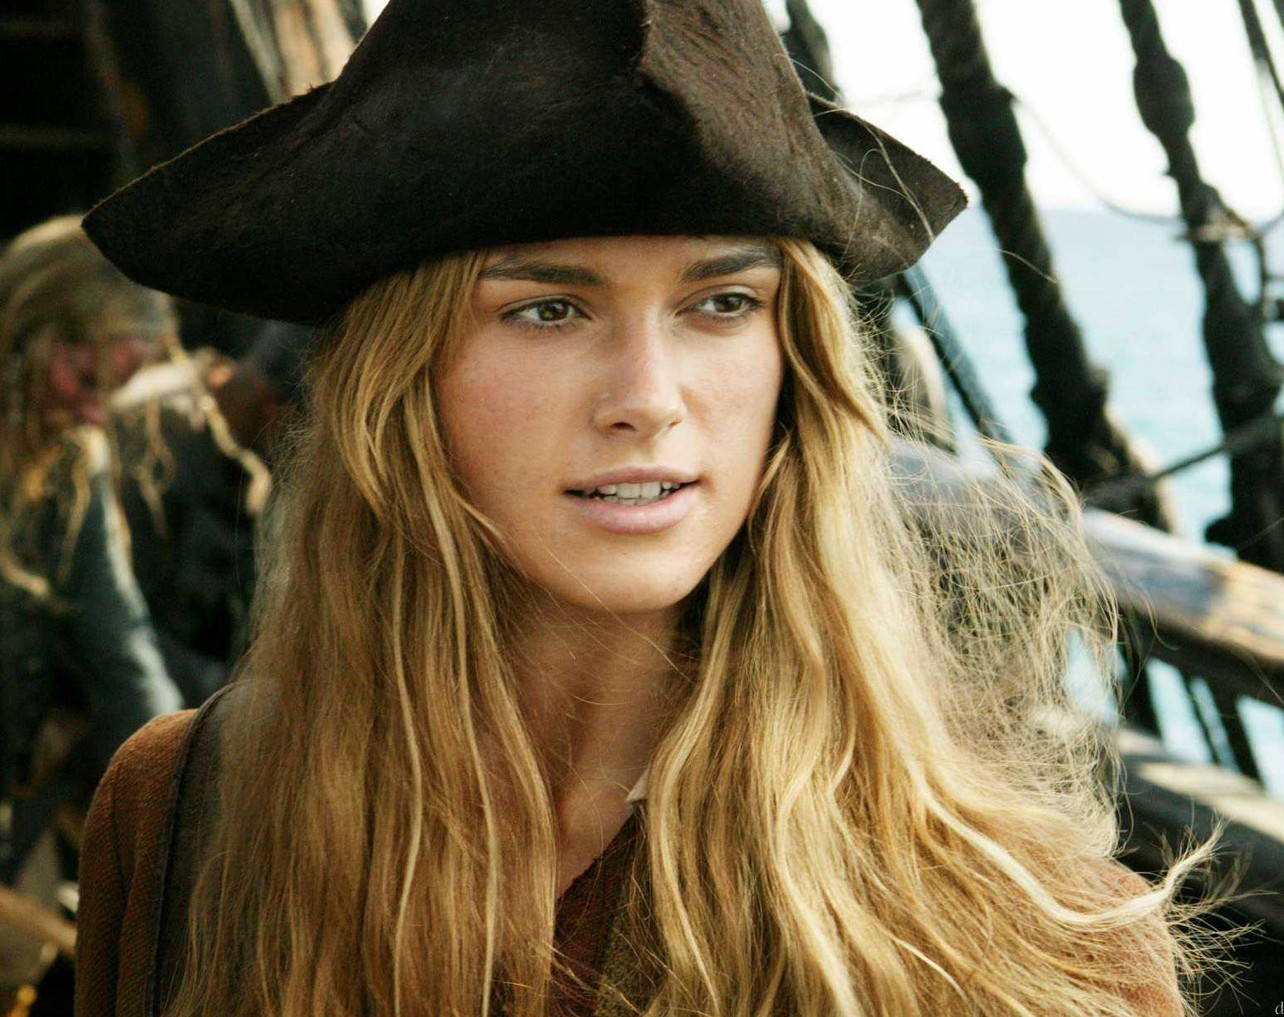 Keira-Knightley-Opts-Out-of-Pirates-of-the-Caribbean-5-458419-2.jpg